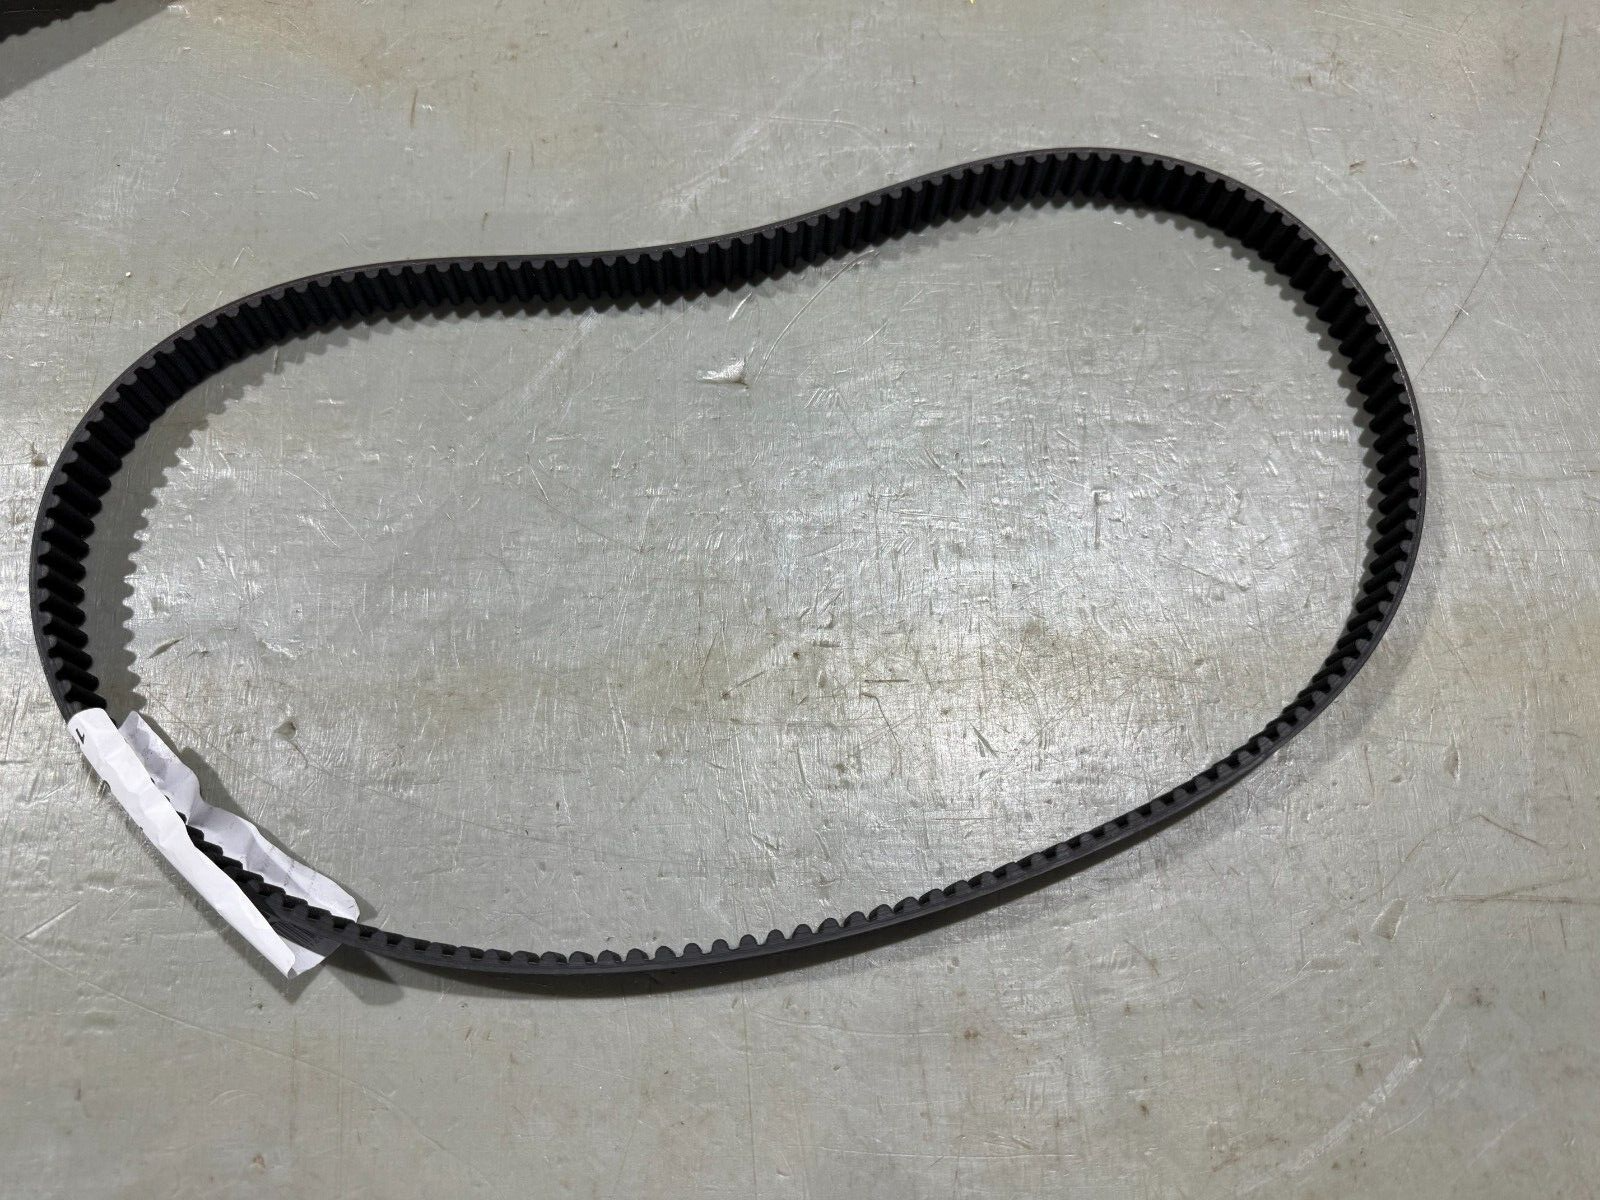 FACTORY NEW GOODYEAR SYNCHRONOUS Sync HTD TIMING BELT 1160-8M-20